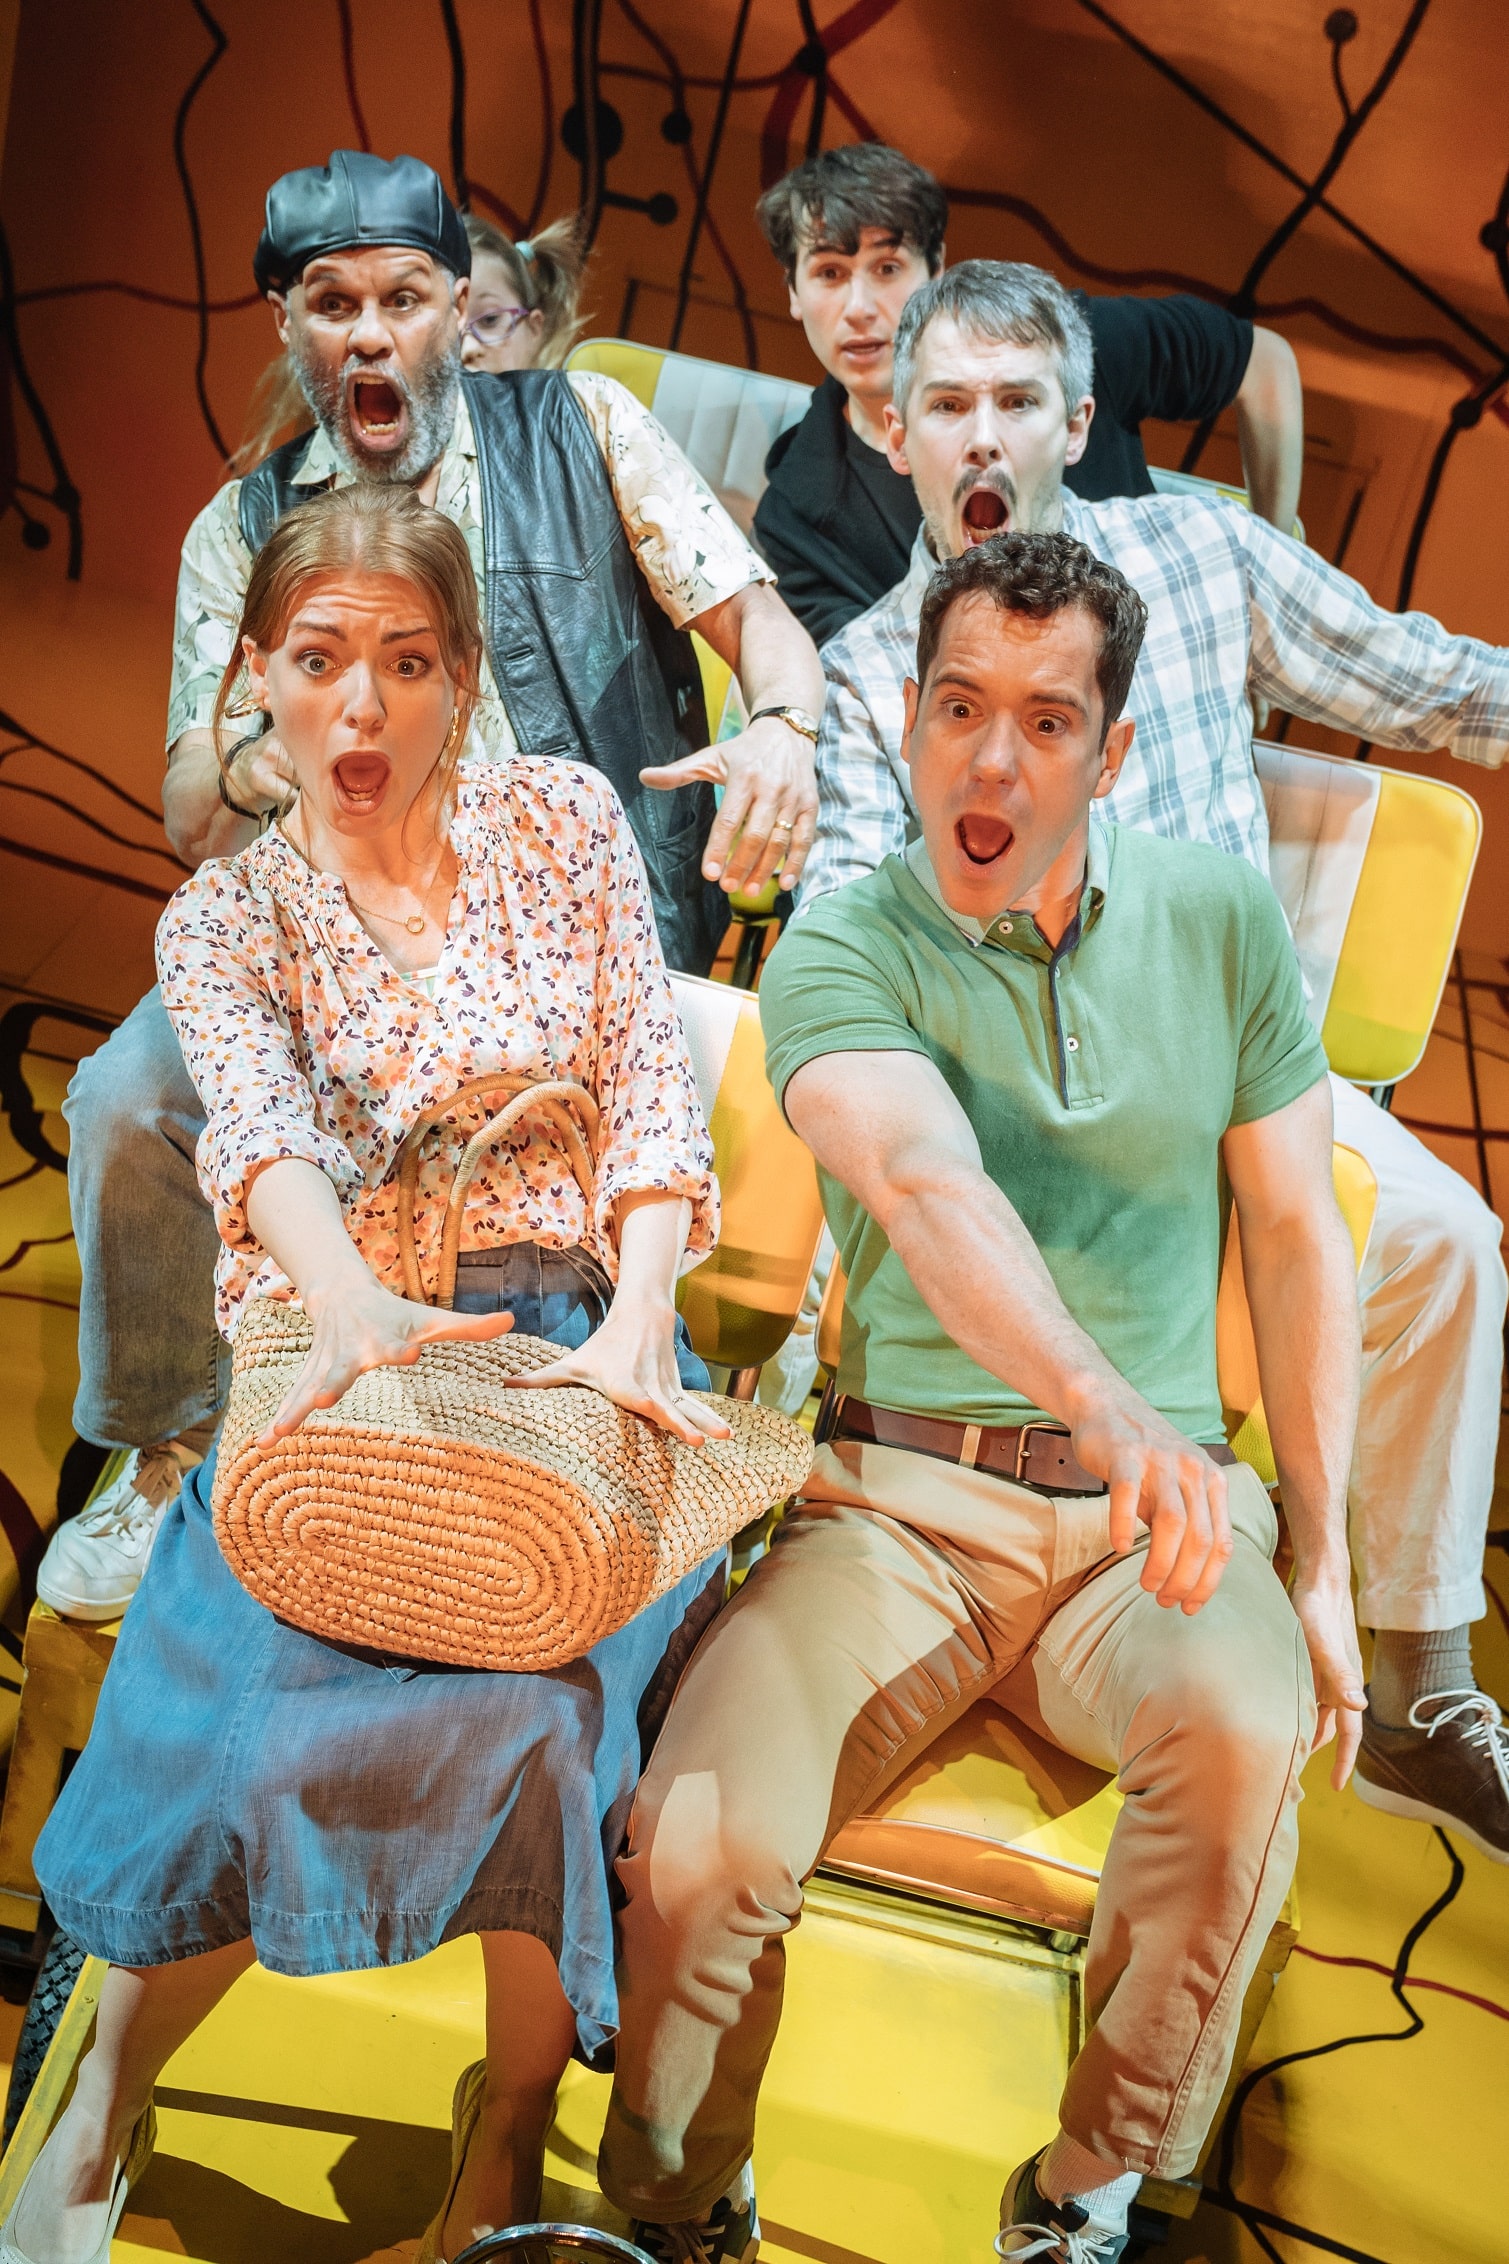 L-R from front Laura Pitt-Pulford, Gabriel Vick, Gary Wilmot, Paul Keating, Lily Mae Denman and Sev Keoshgerian onstage pulling shocked faces from seats representing the yellow campervan